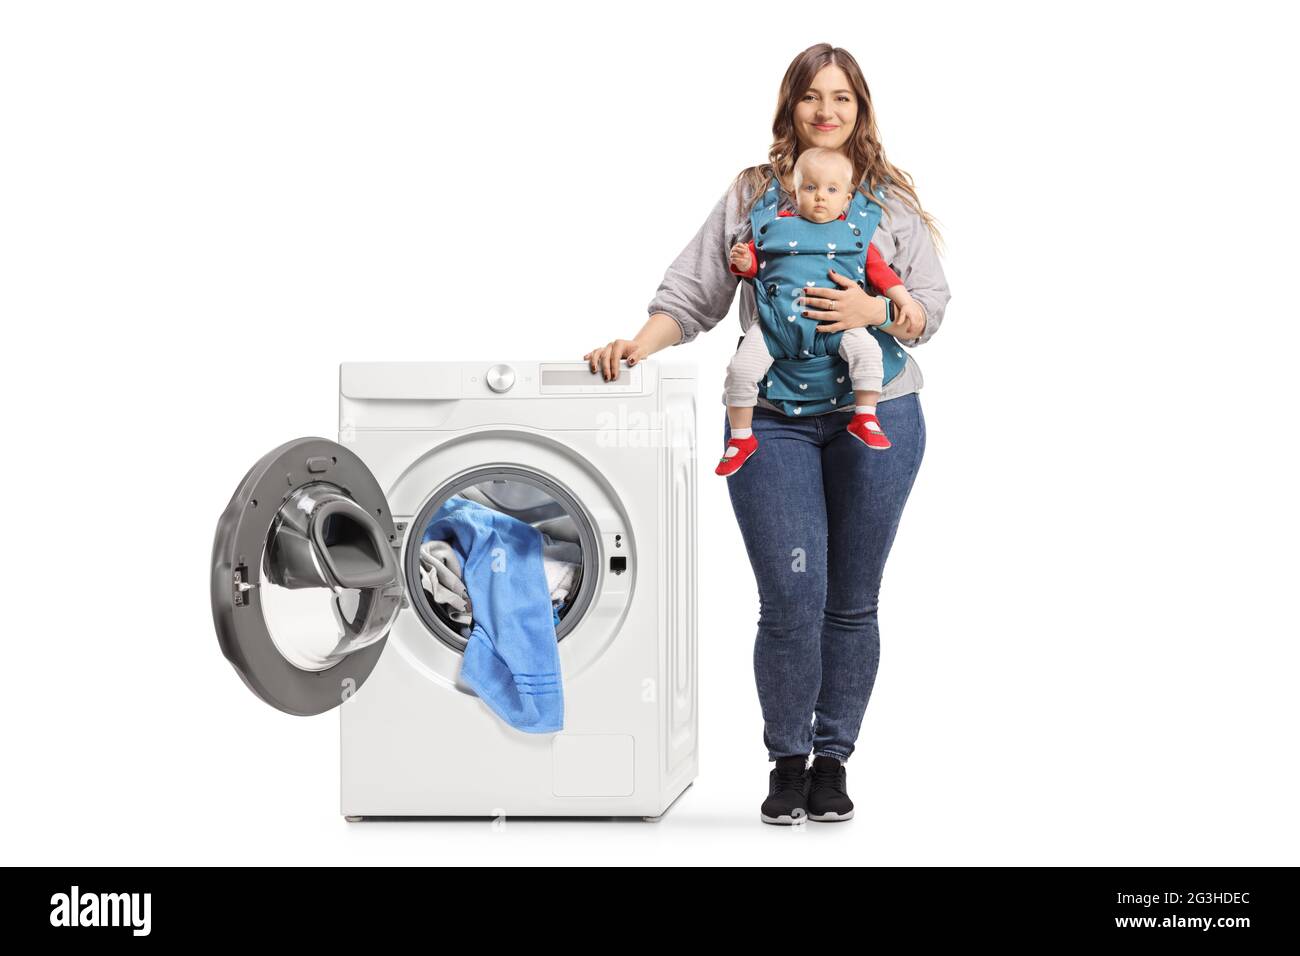 Full length portrait of a mother with a baby in a carrier standing next to a washing machine isolated on white background Stock Photo